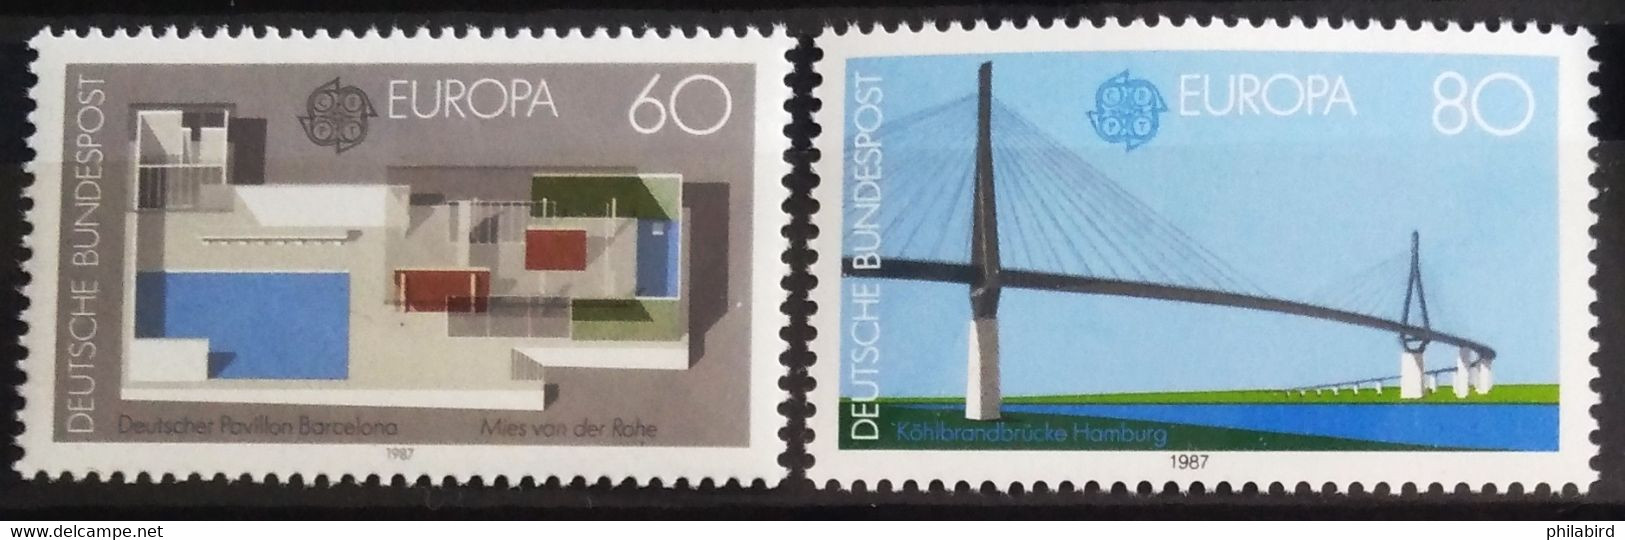 EUROPA 1987 - ALLEMAGNE                    N° 1153/1154                        NEUF** - 1987